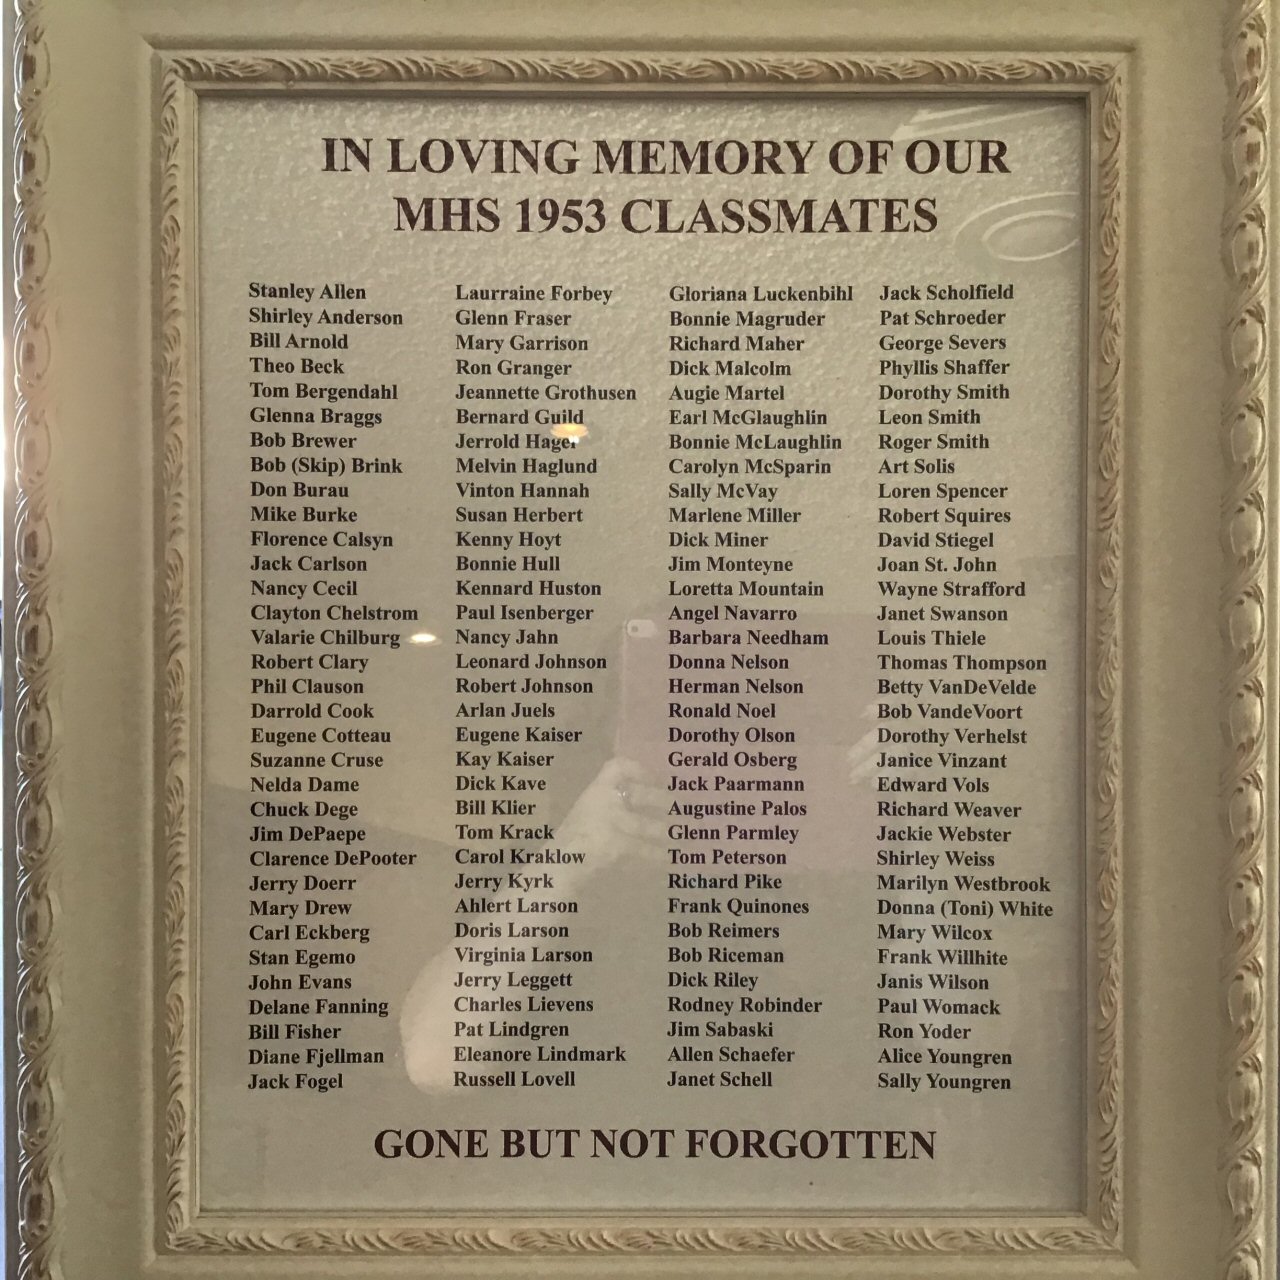 In loving memory of our MHS 1953 Classmates